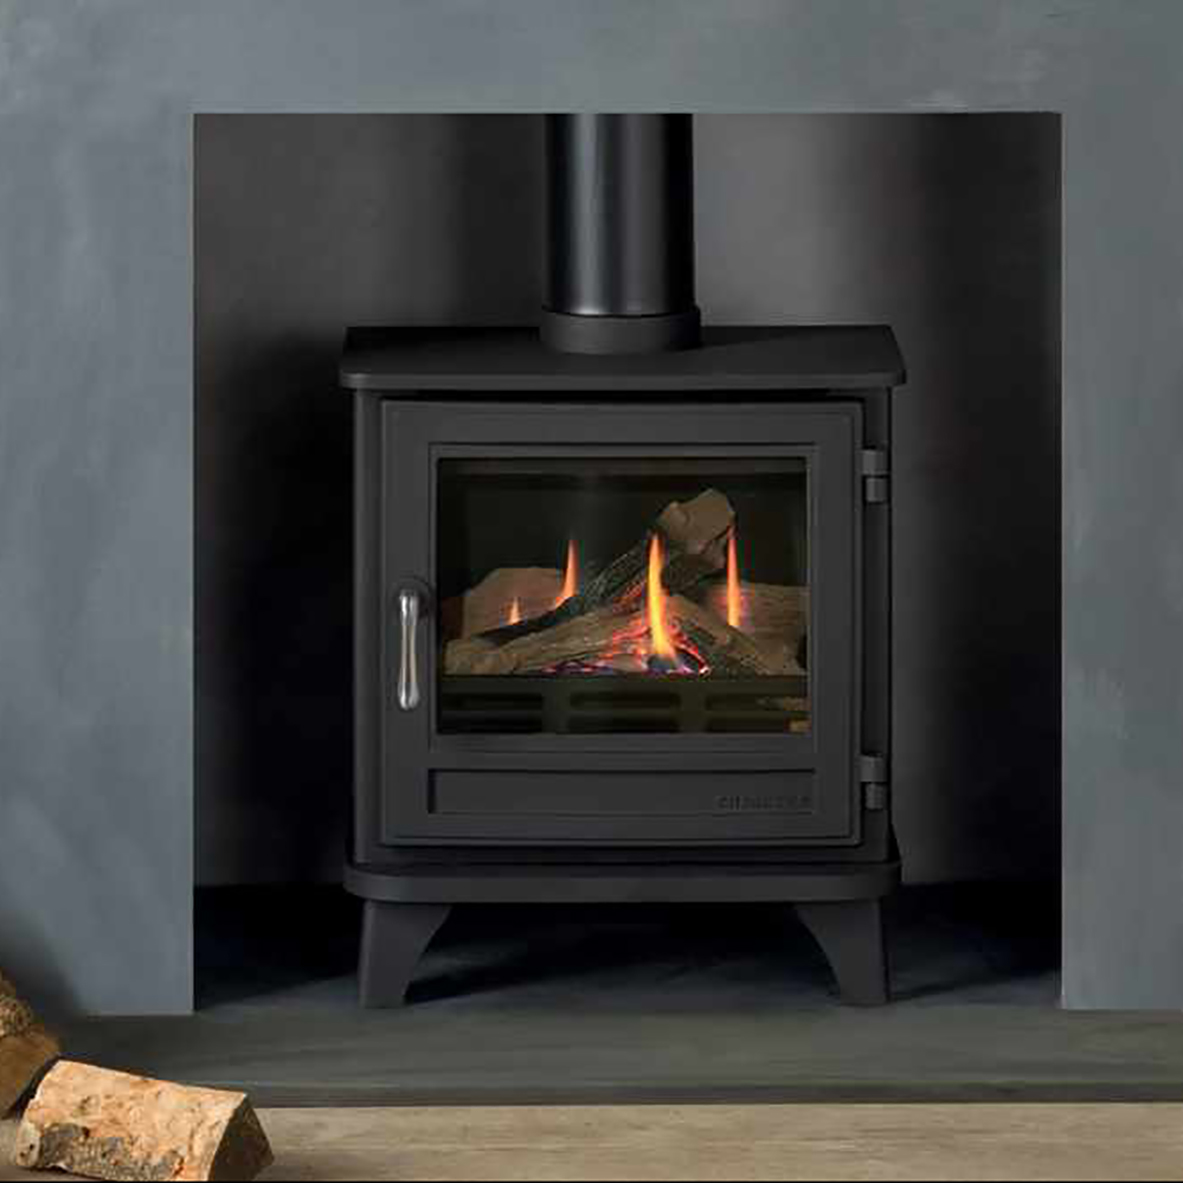 Chesneys Gas Stoves